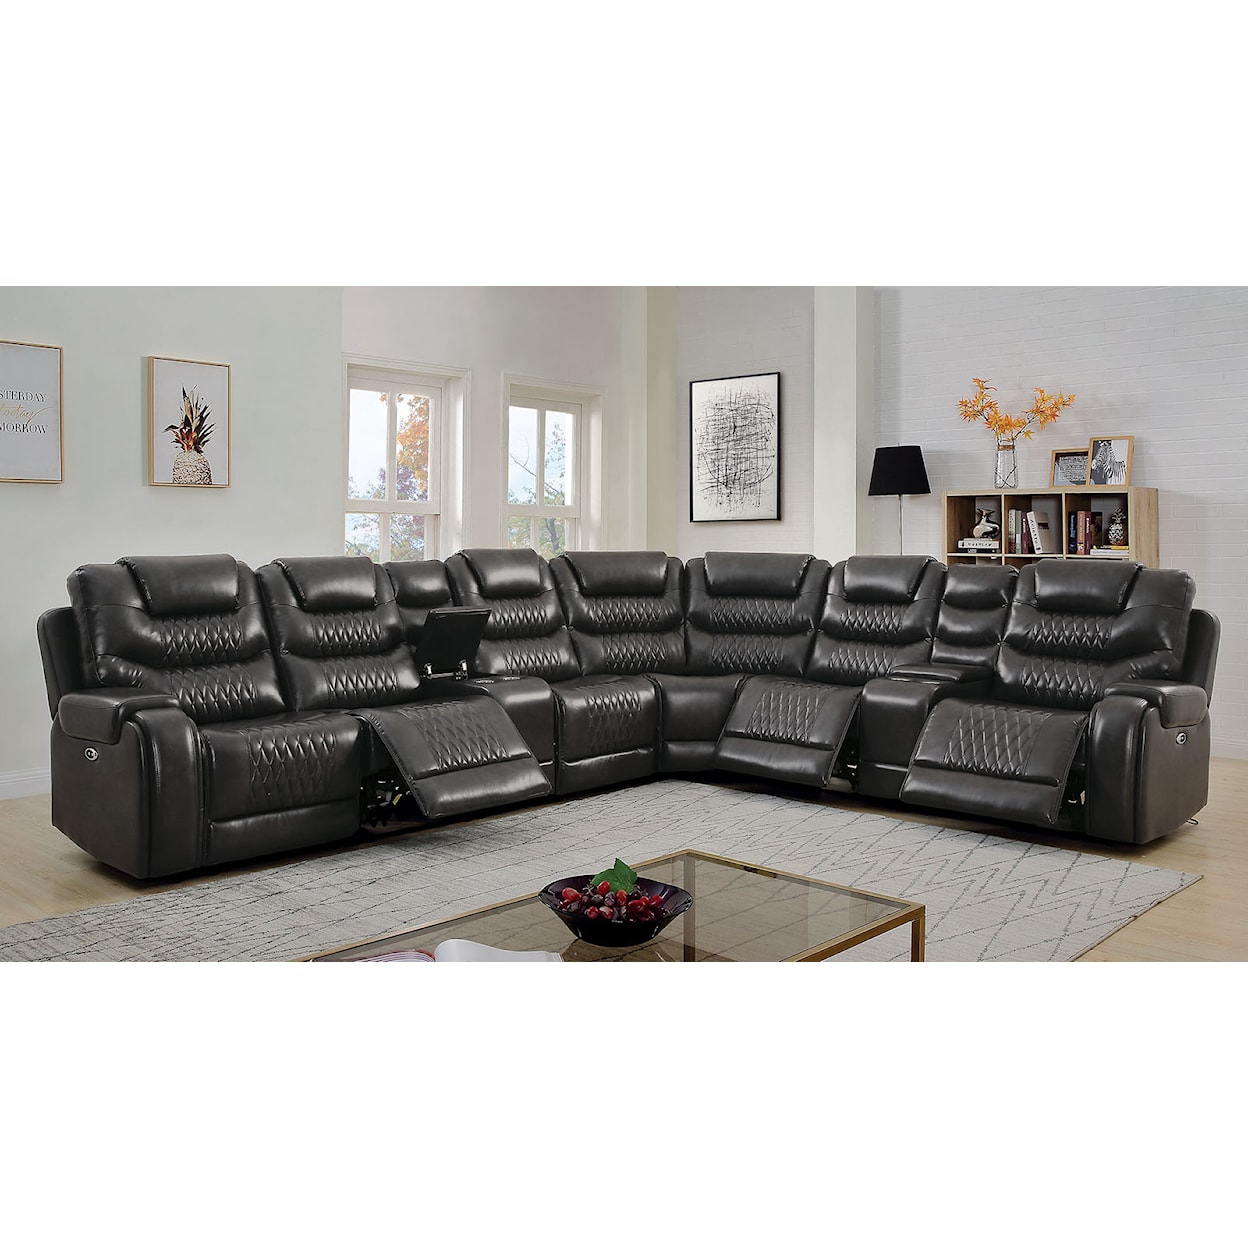 Furniture of America Mariah Upholstery Power Sectional + Power Recliner